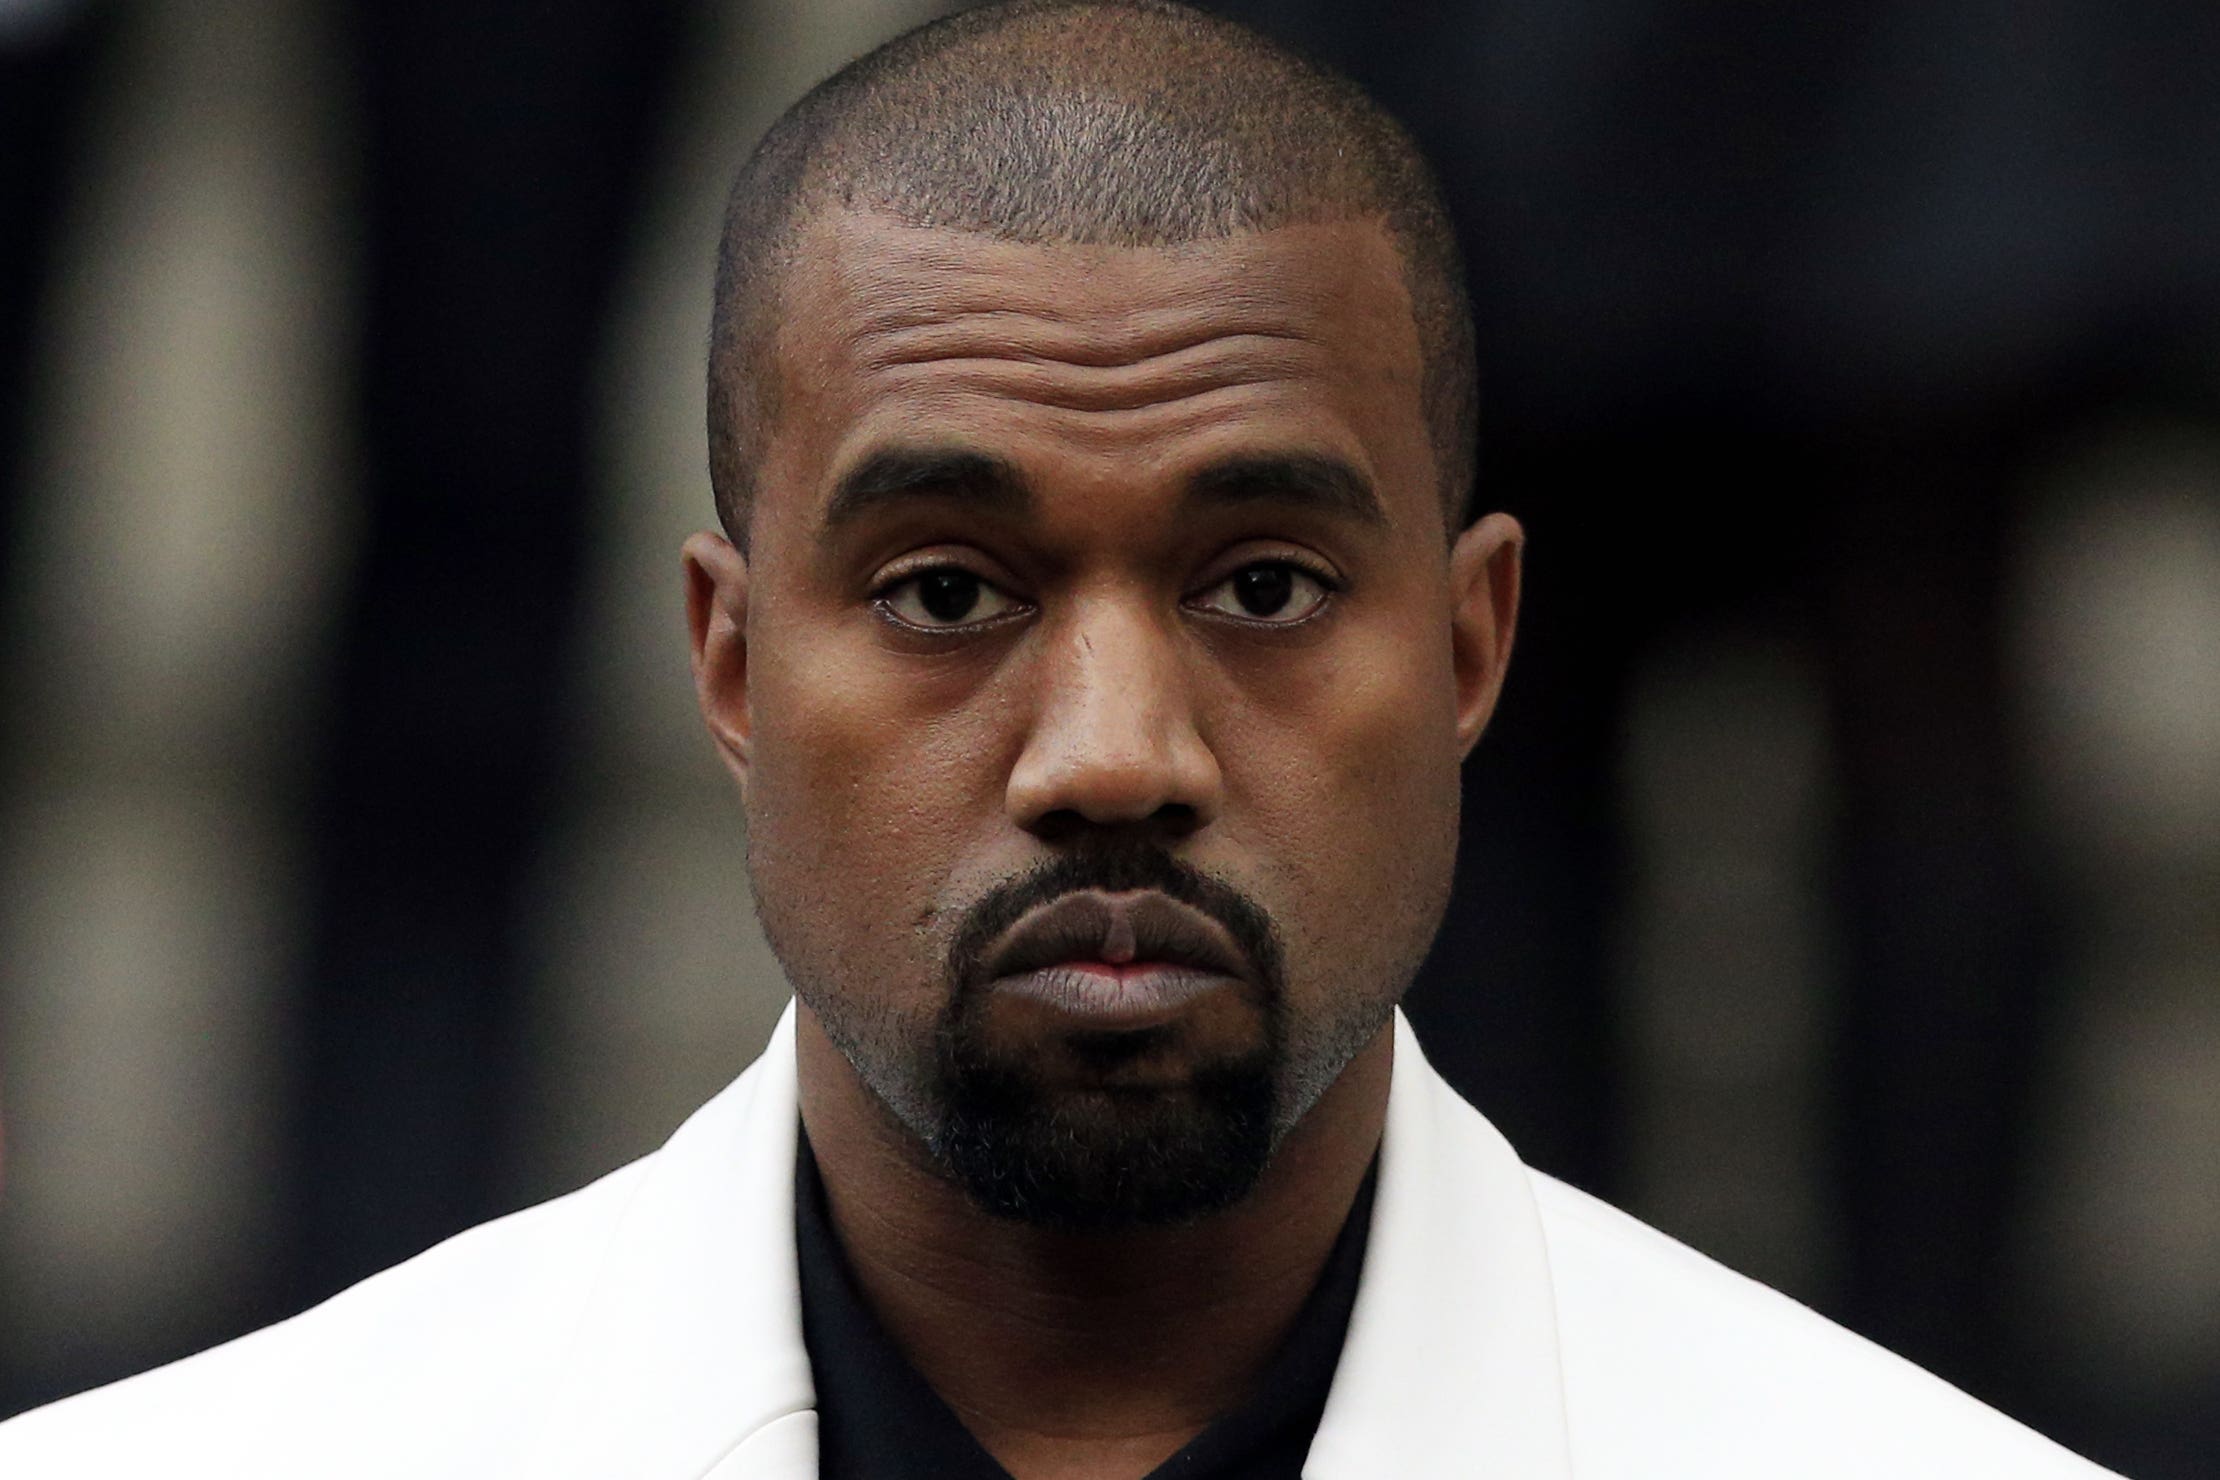 Kanye West’s Twitter account suspended after violating platform policy (Jonathan Brady/PA)